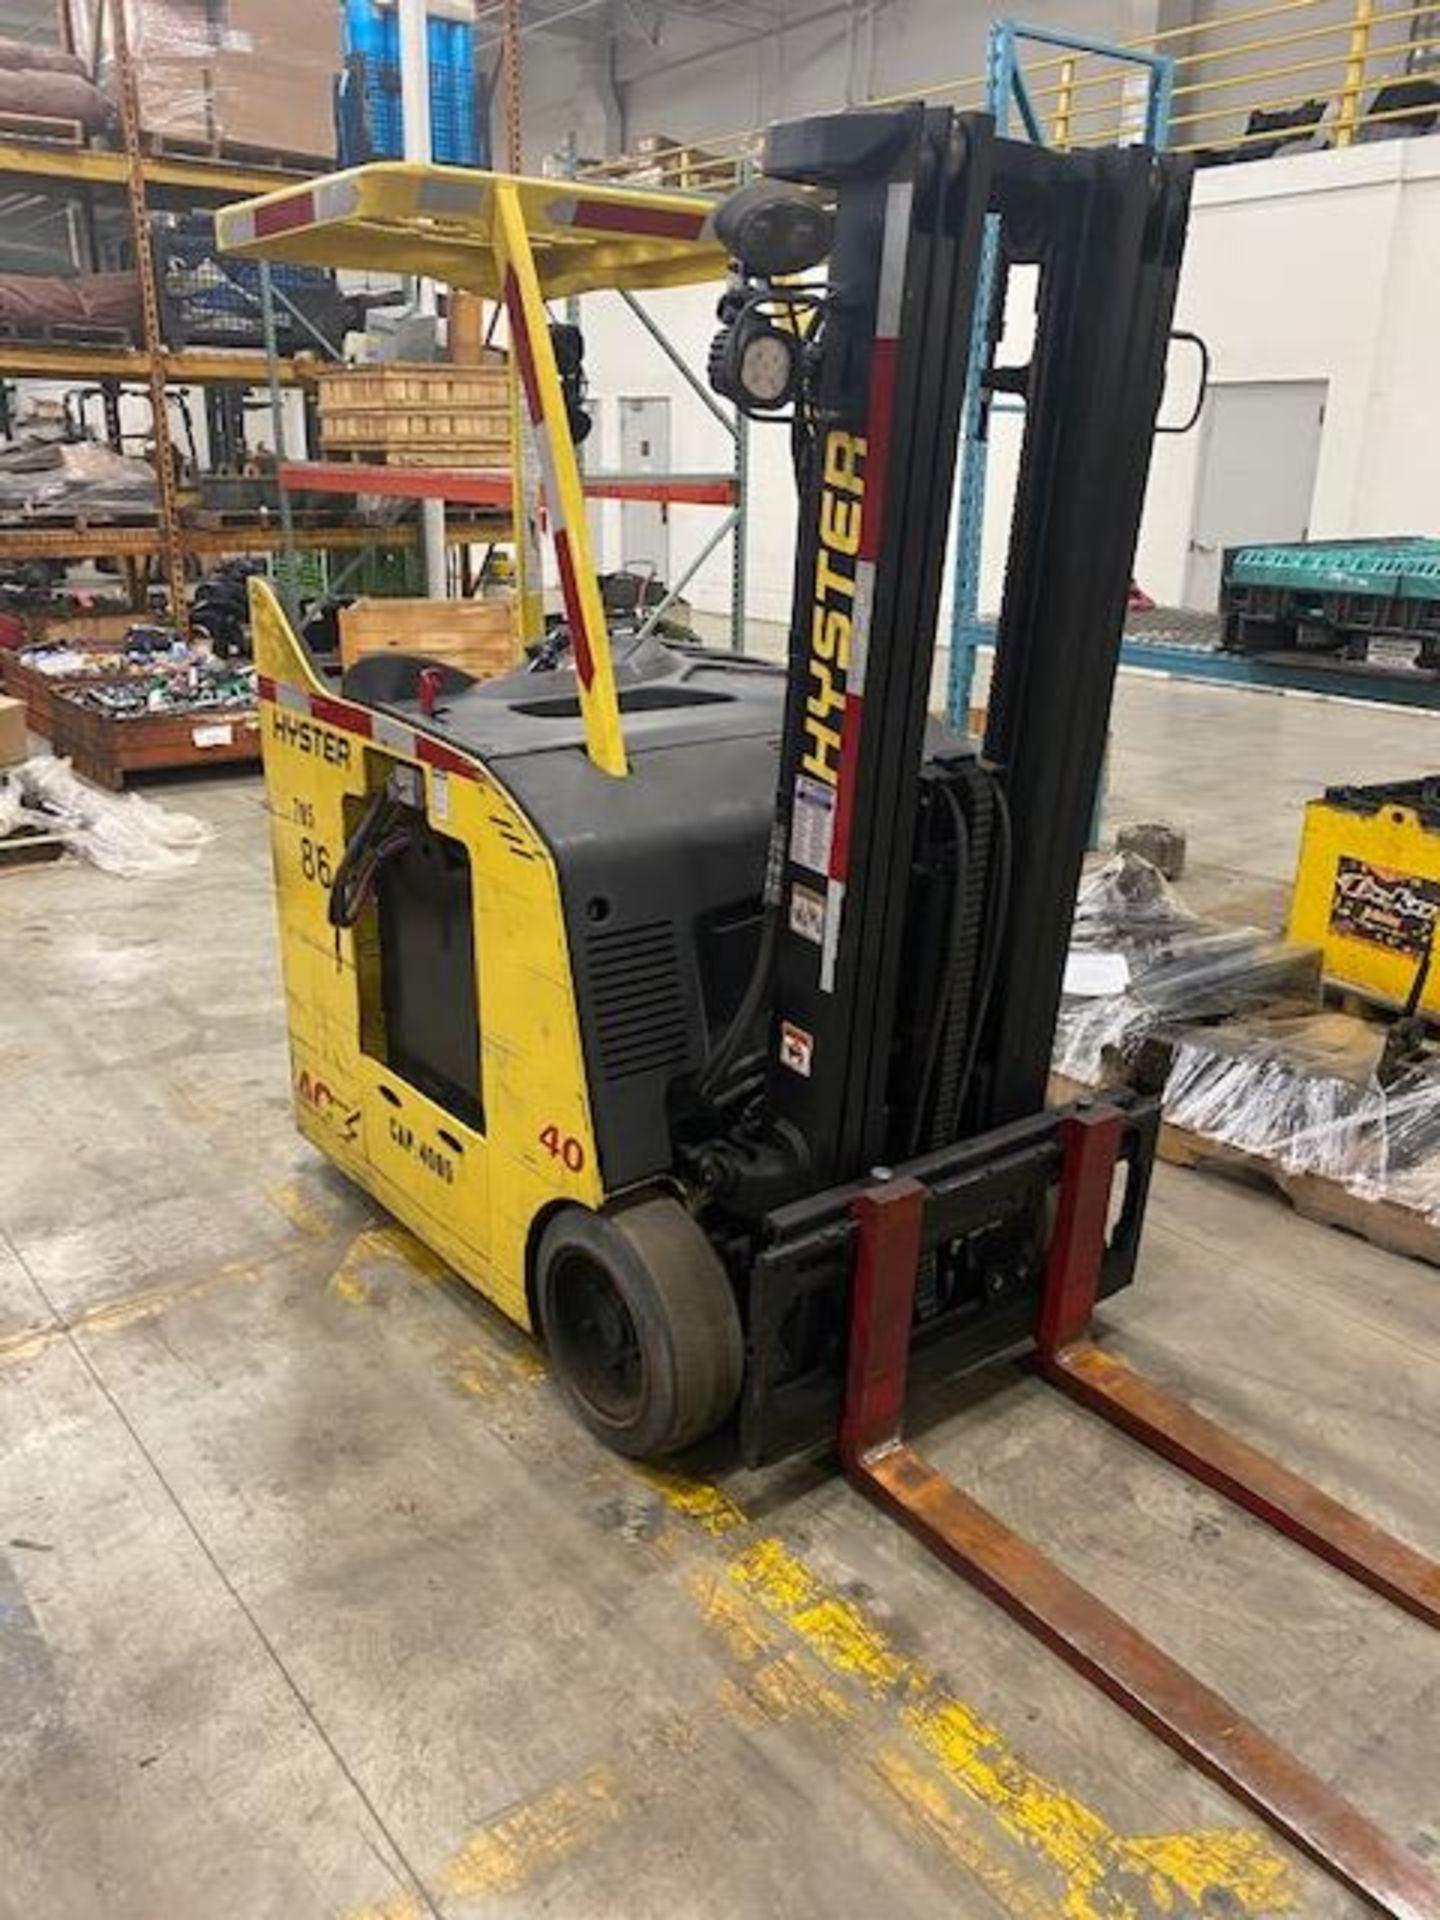 2014 Hyster 4,000 Lb Capacity Electric Forklift Model E40HSD2-21